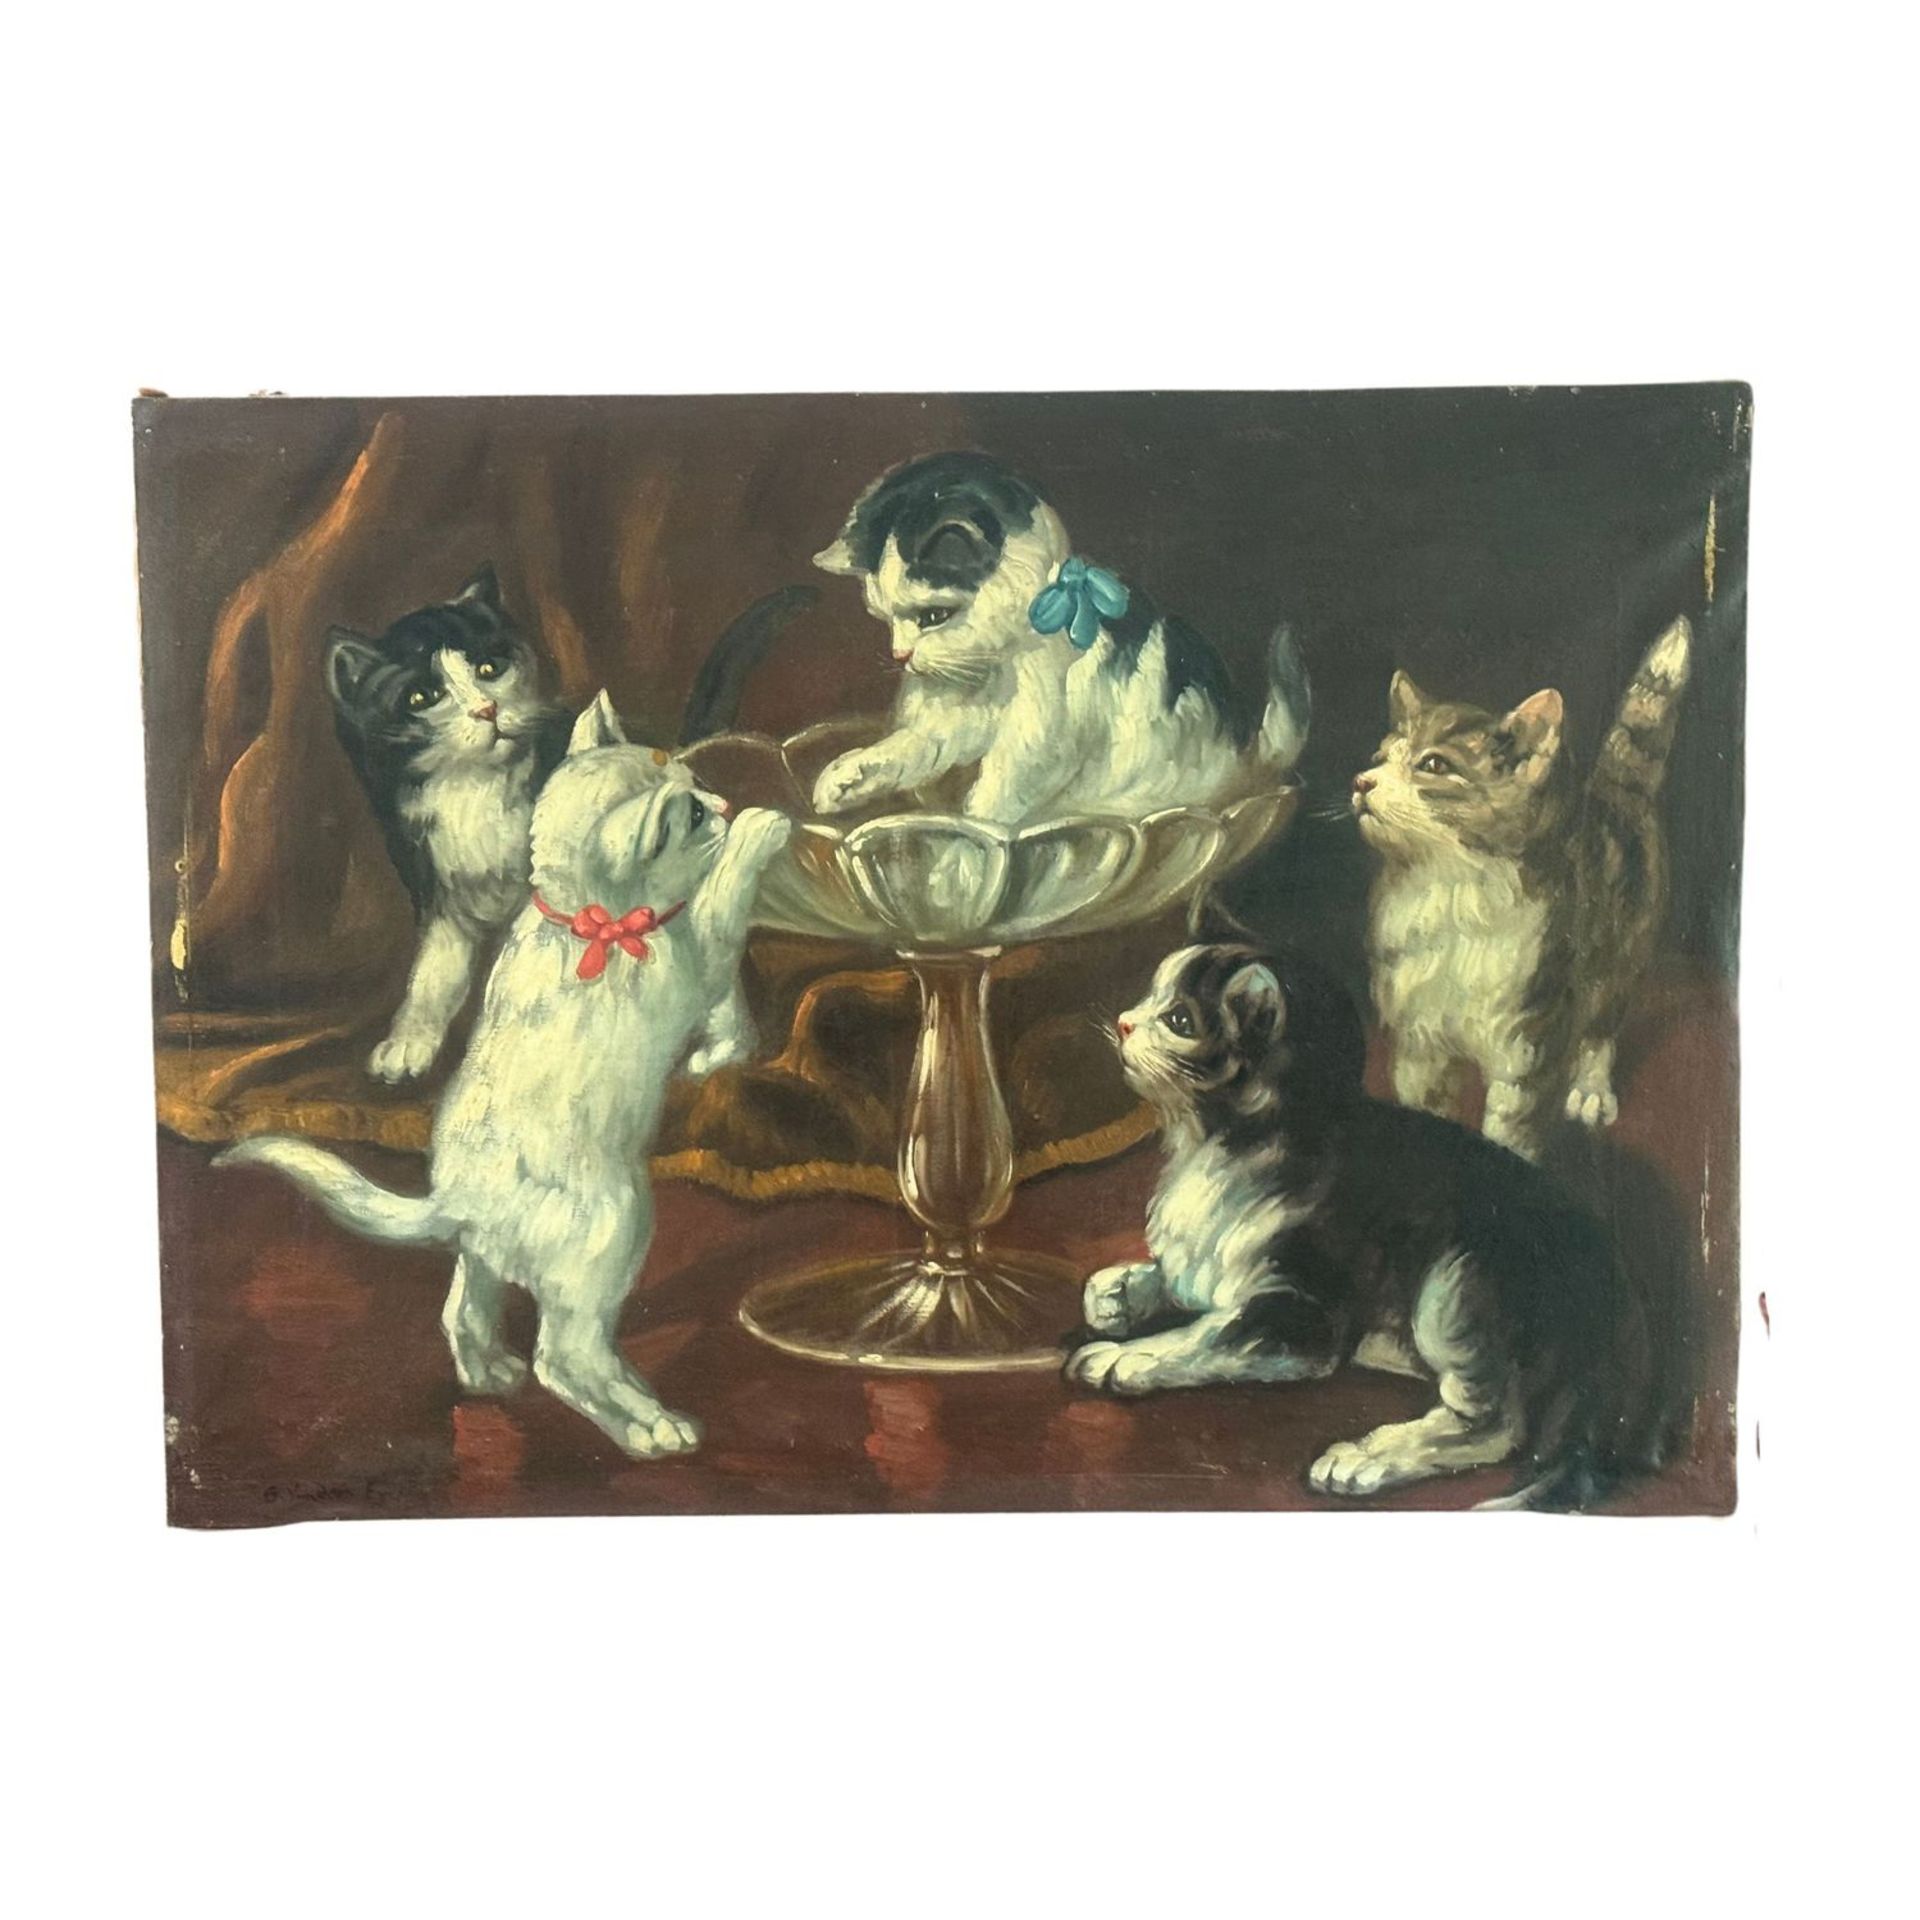 Allegory of cats